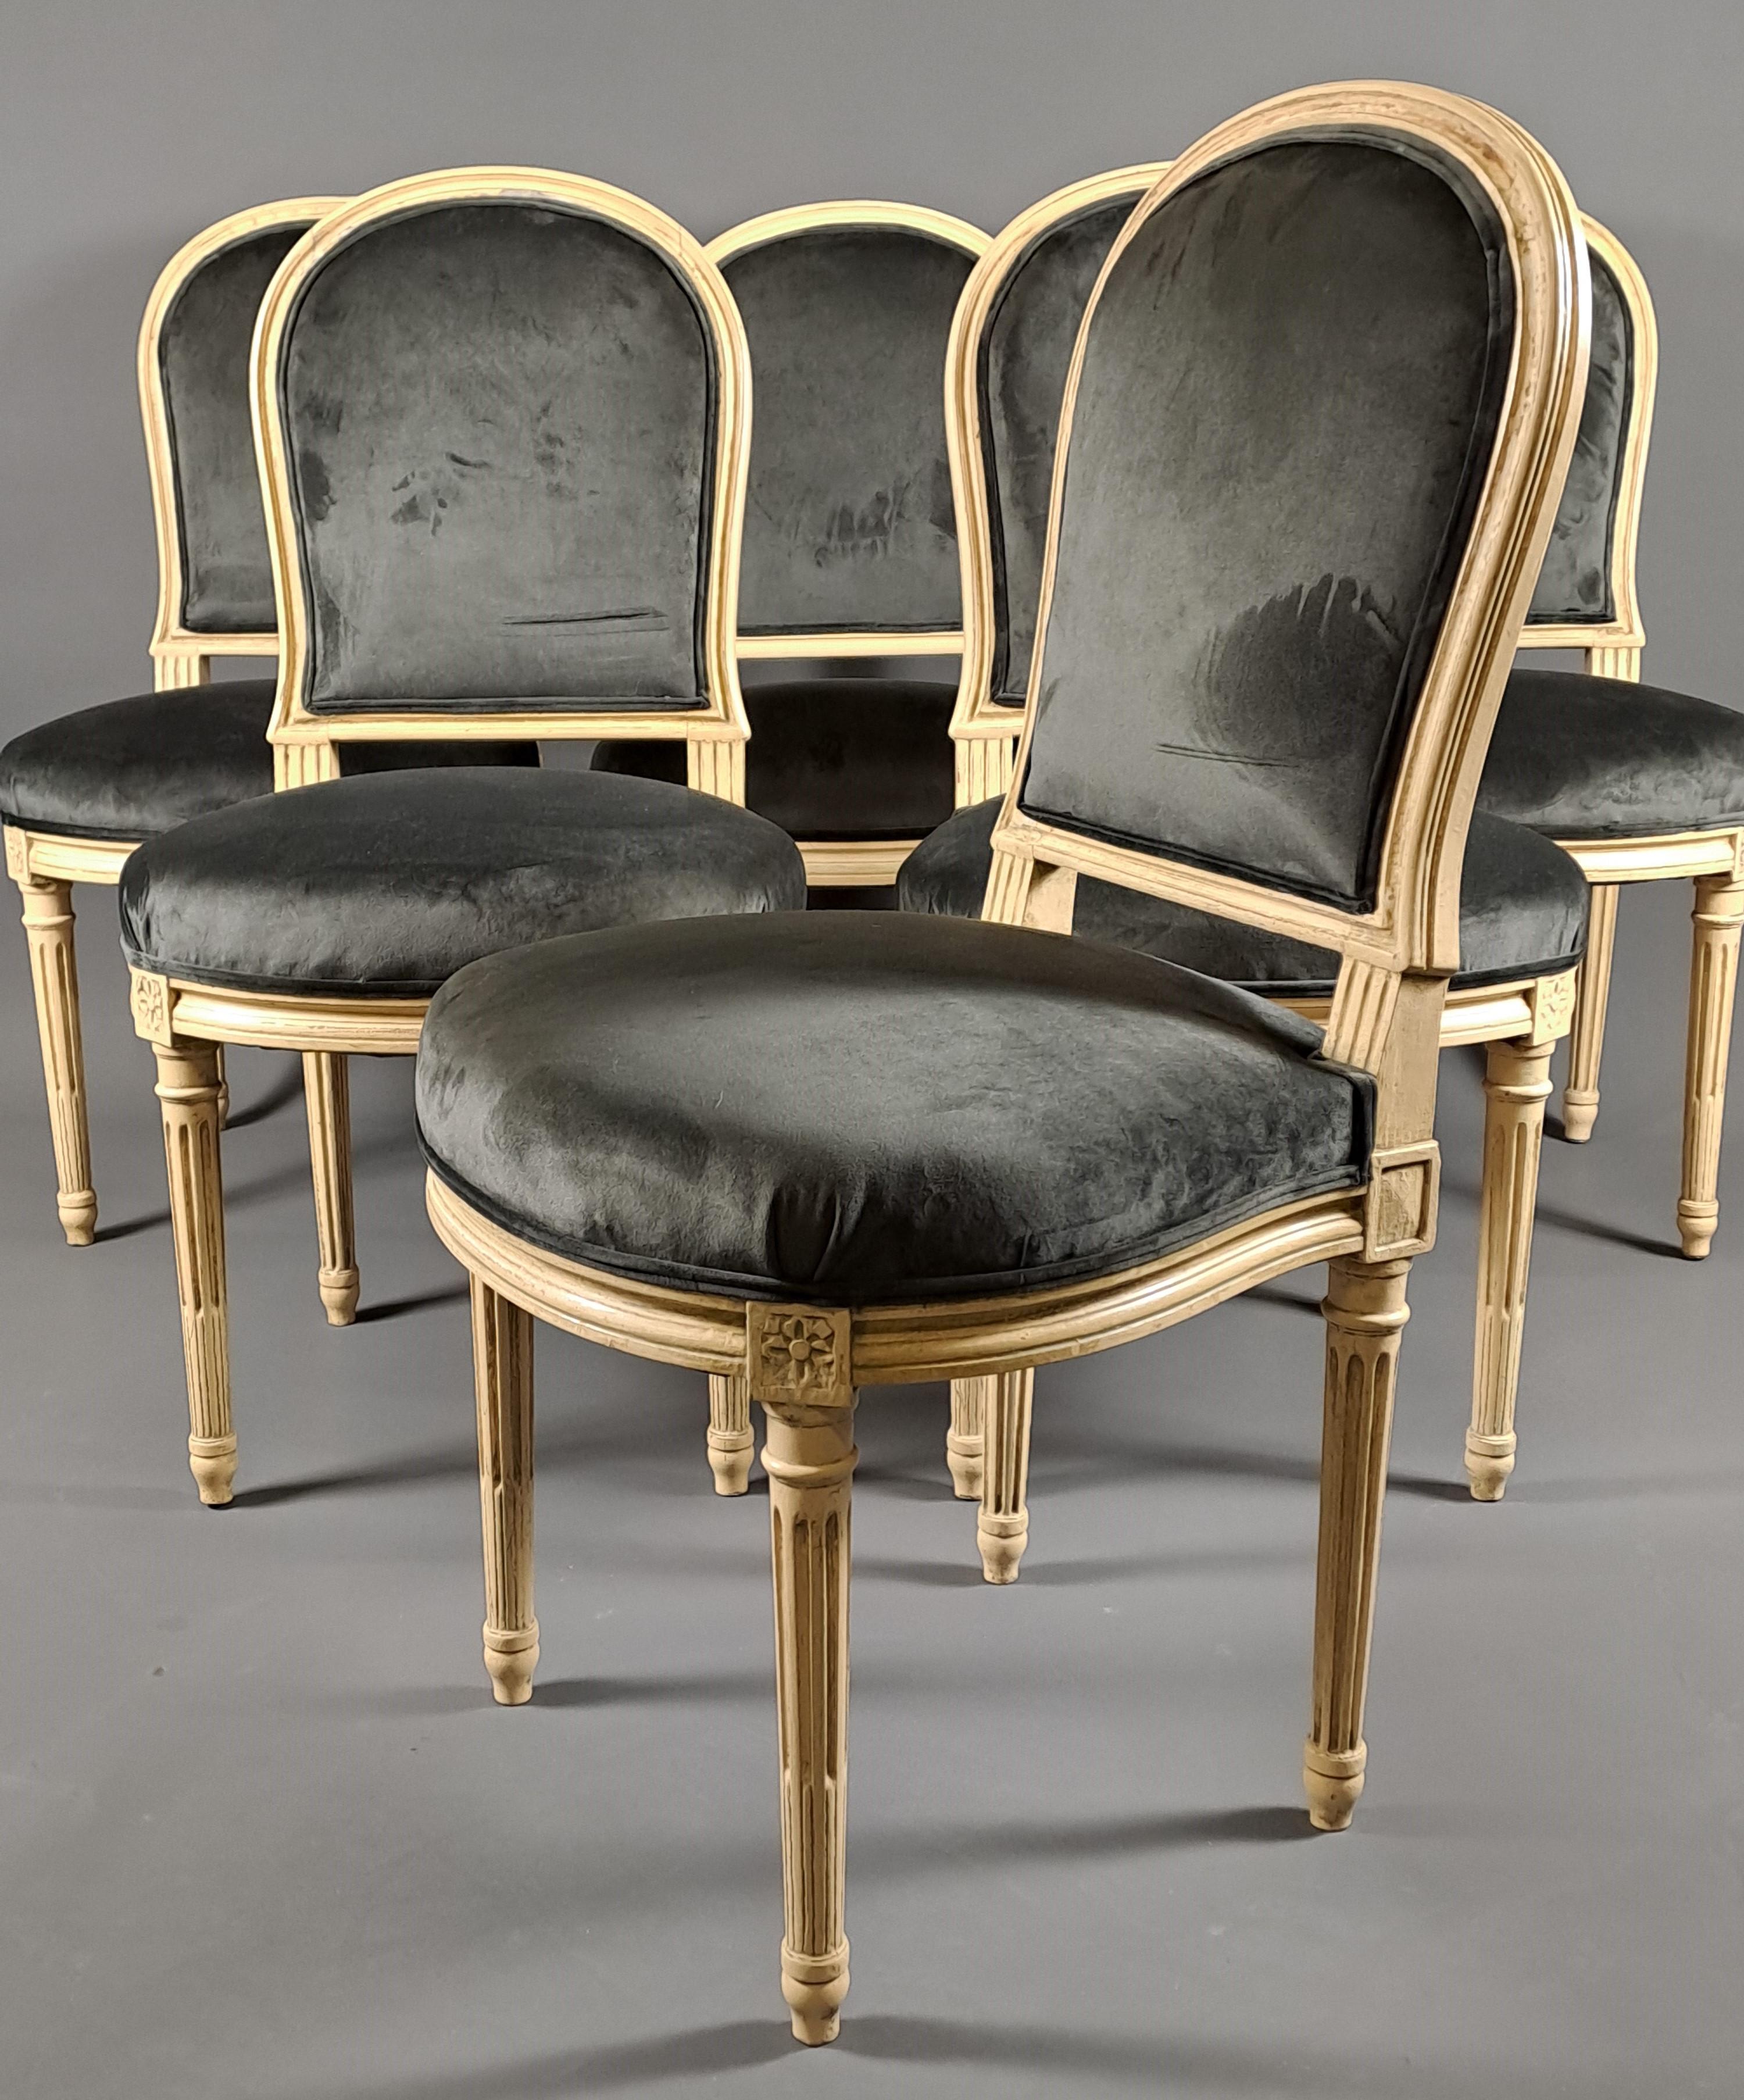 19th Century Suite Of 6 Louis XVI Style Chairs In Lacquered Wood After A Model By Jacob For Sale